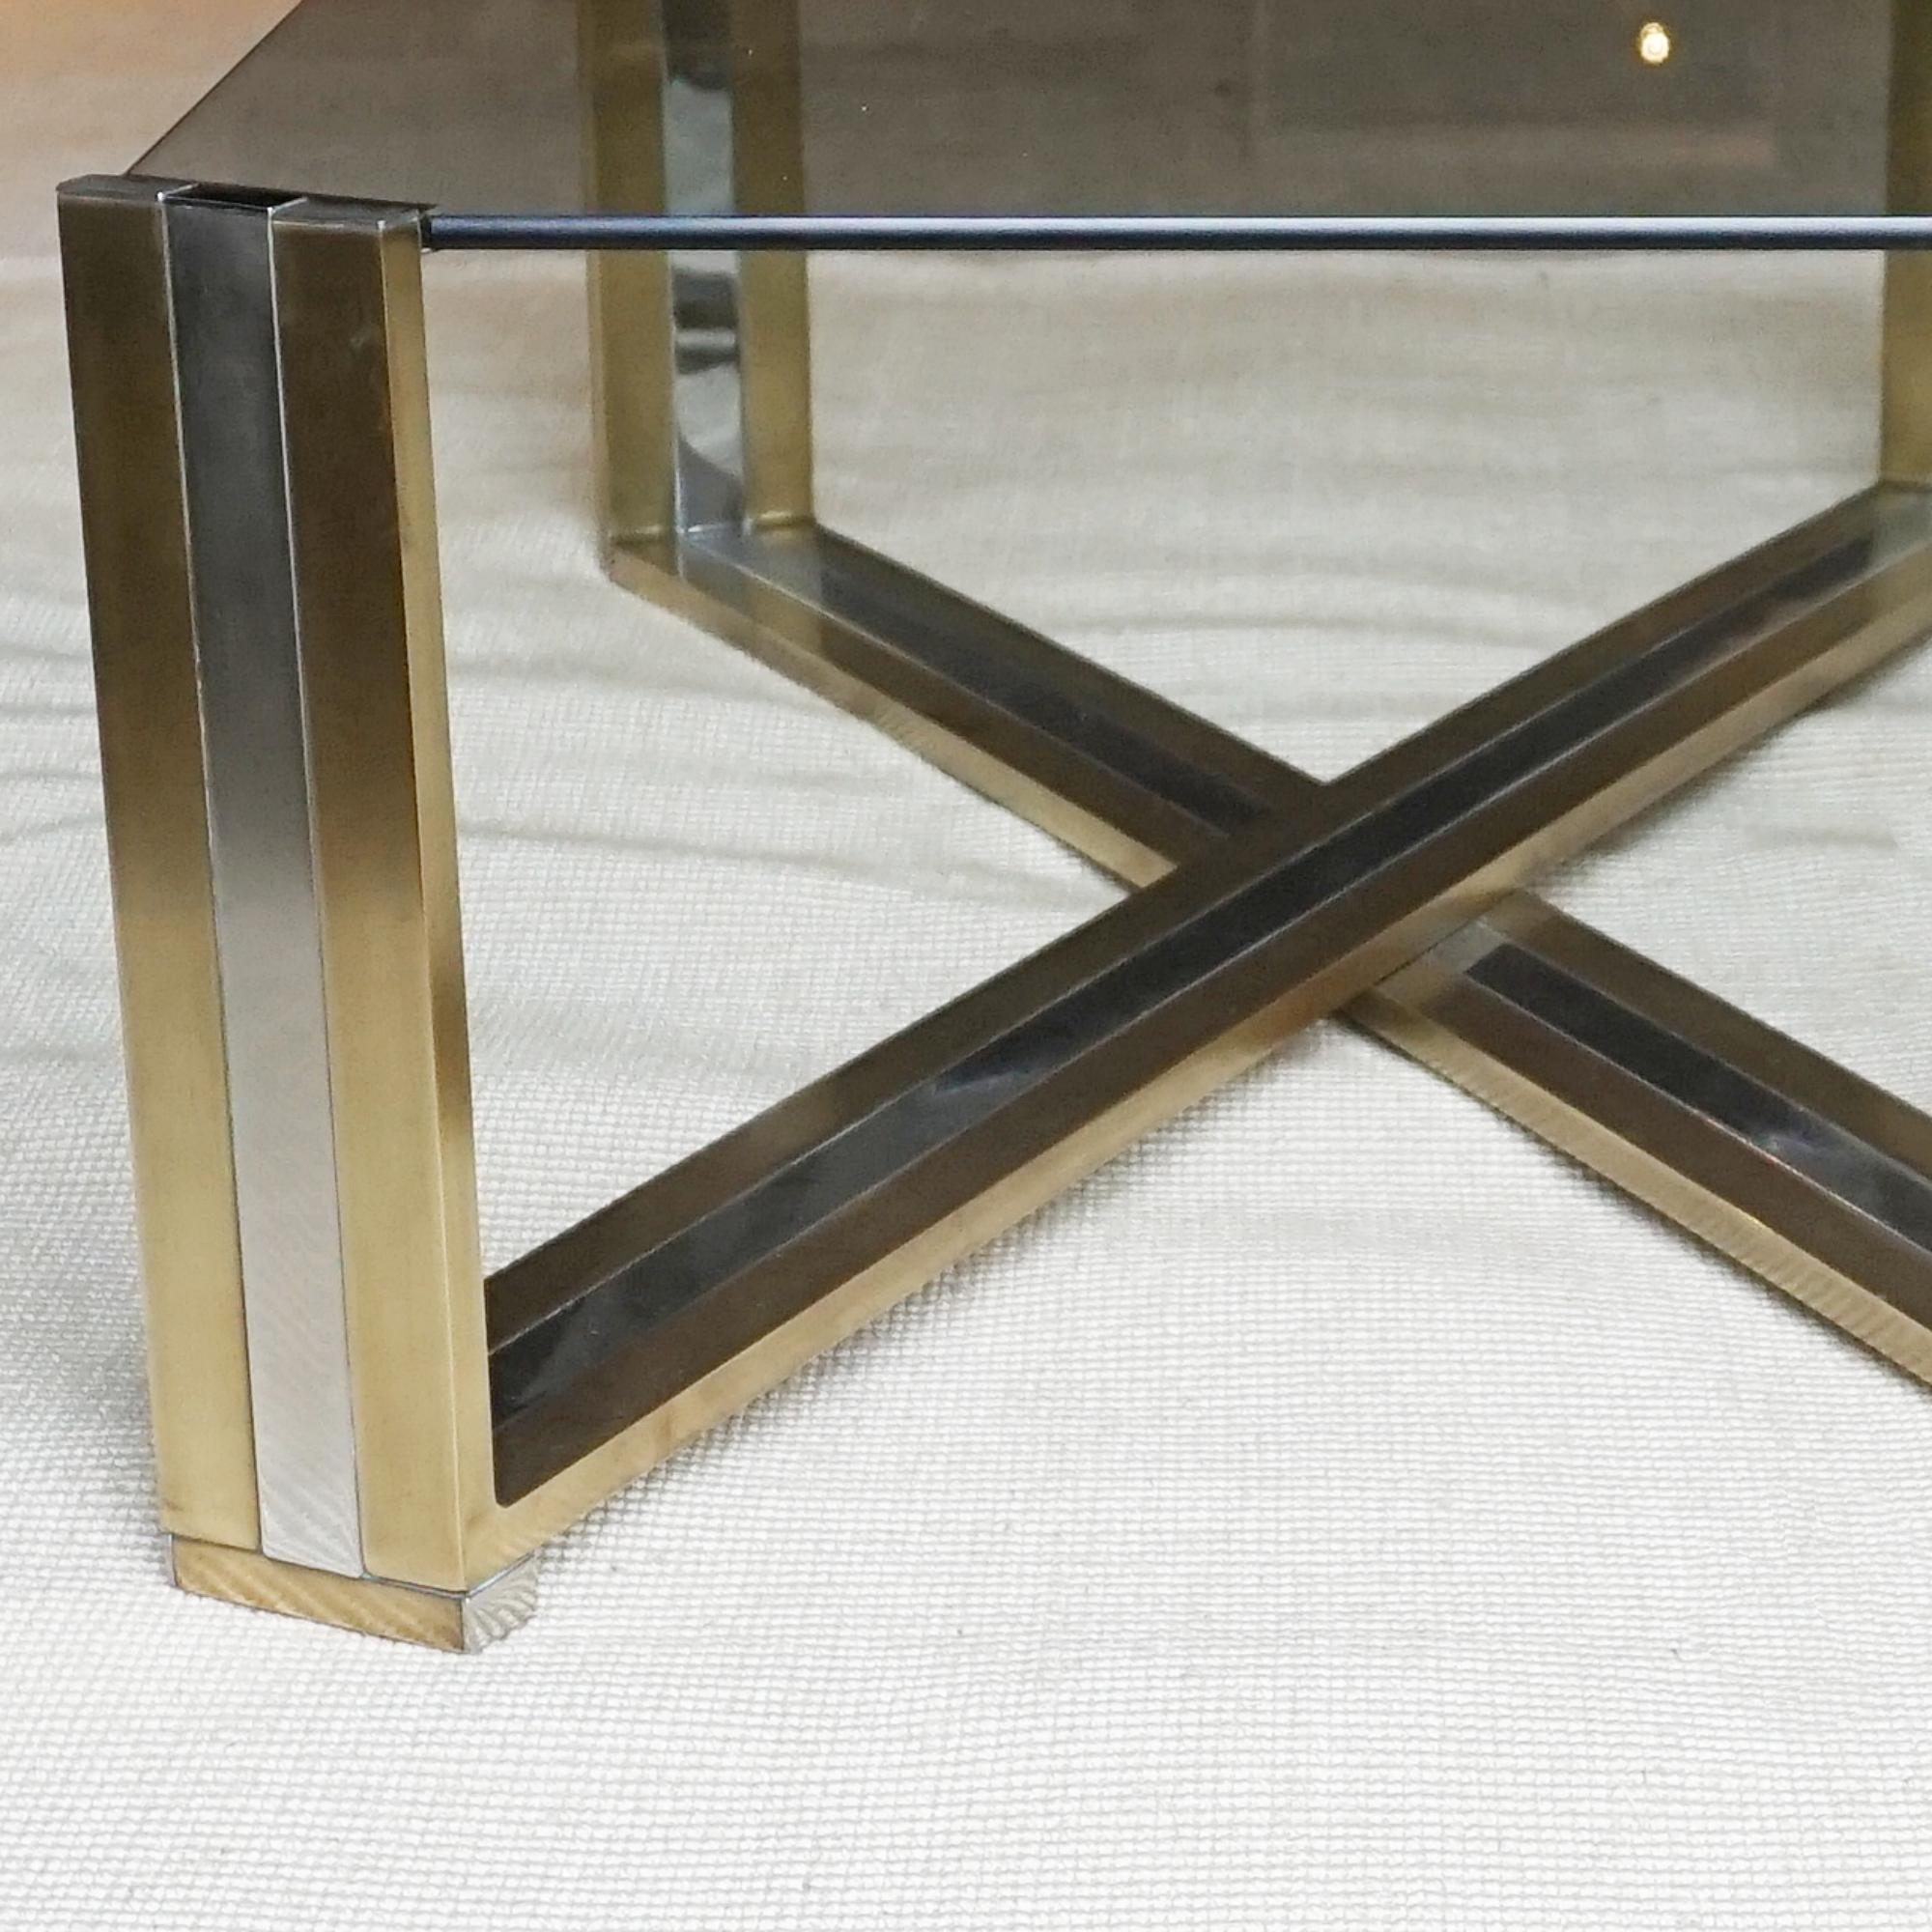 Late 20th Century Modernist 1970's X-Frame Coffee Table by Romeo Rega (1925-1981)